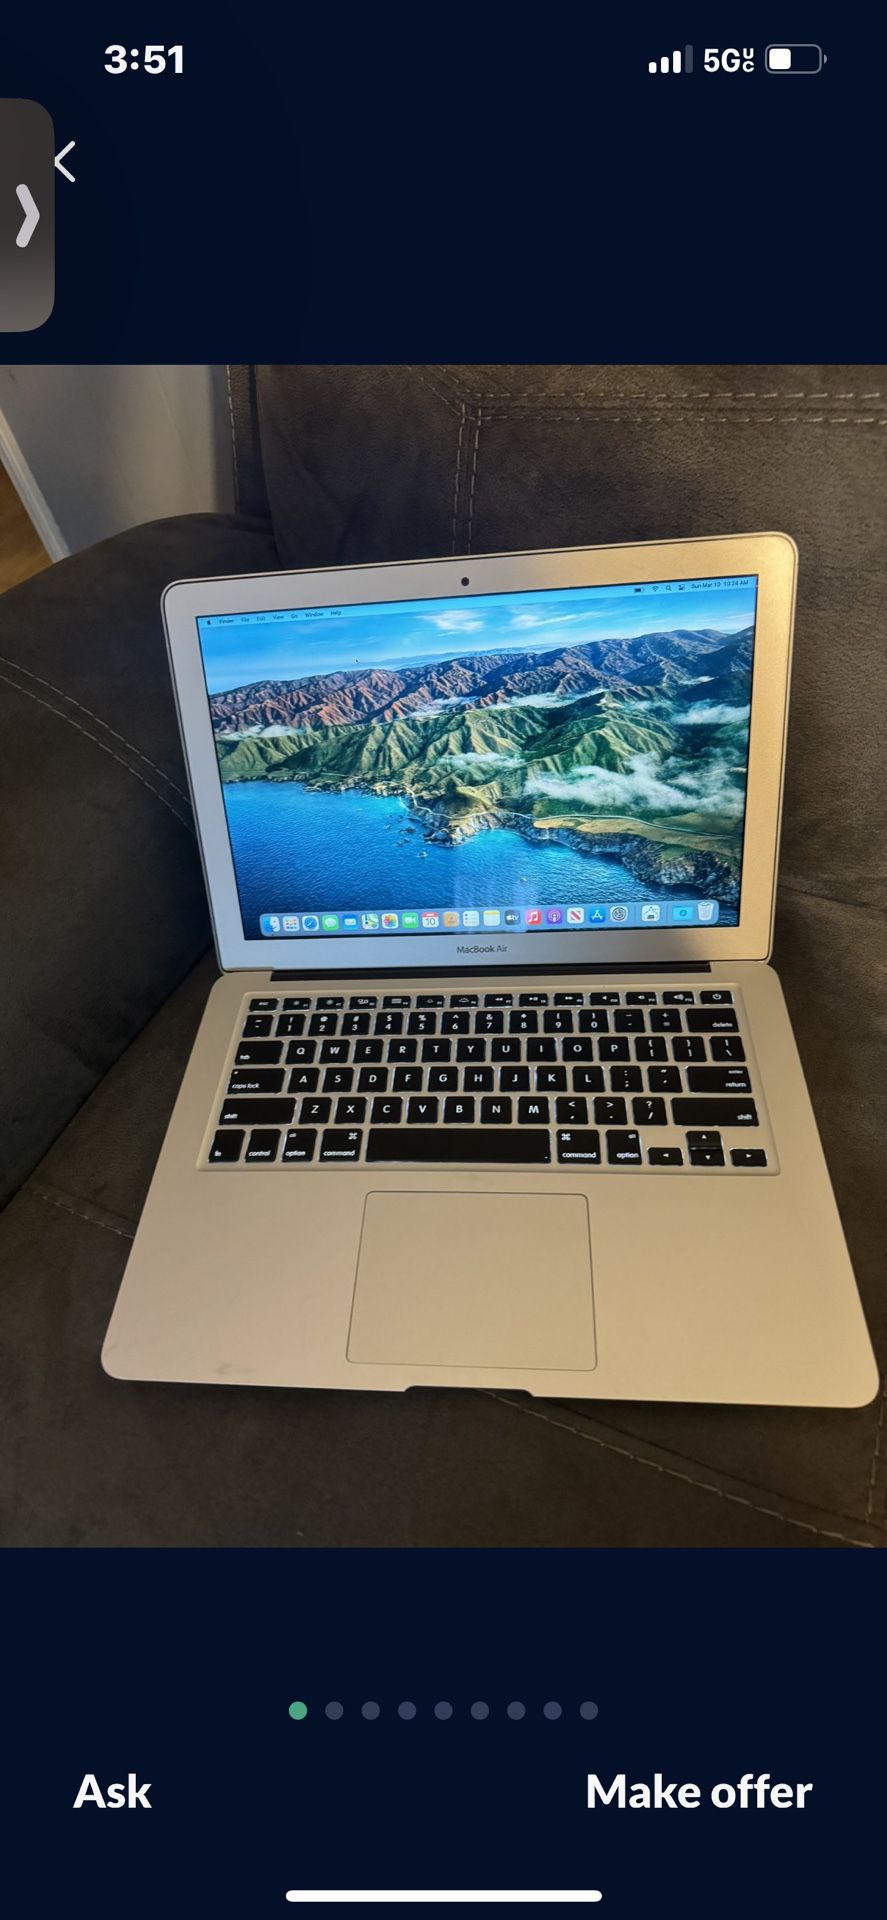 MacBook Air (Early 2014) i7 8 GB 1600 MHz DDR3 Graphics Intel HD Graphics 5000